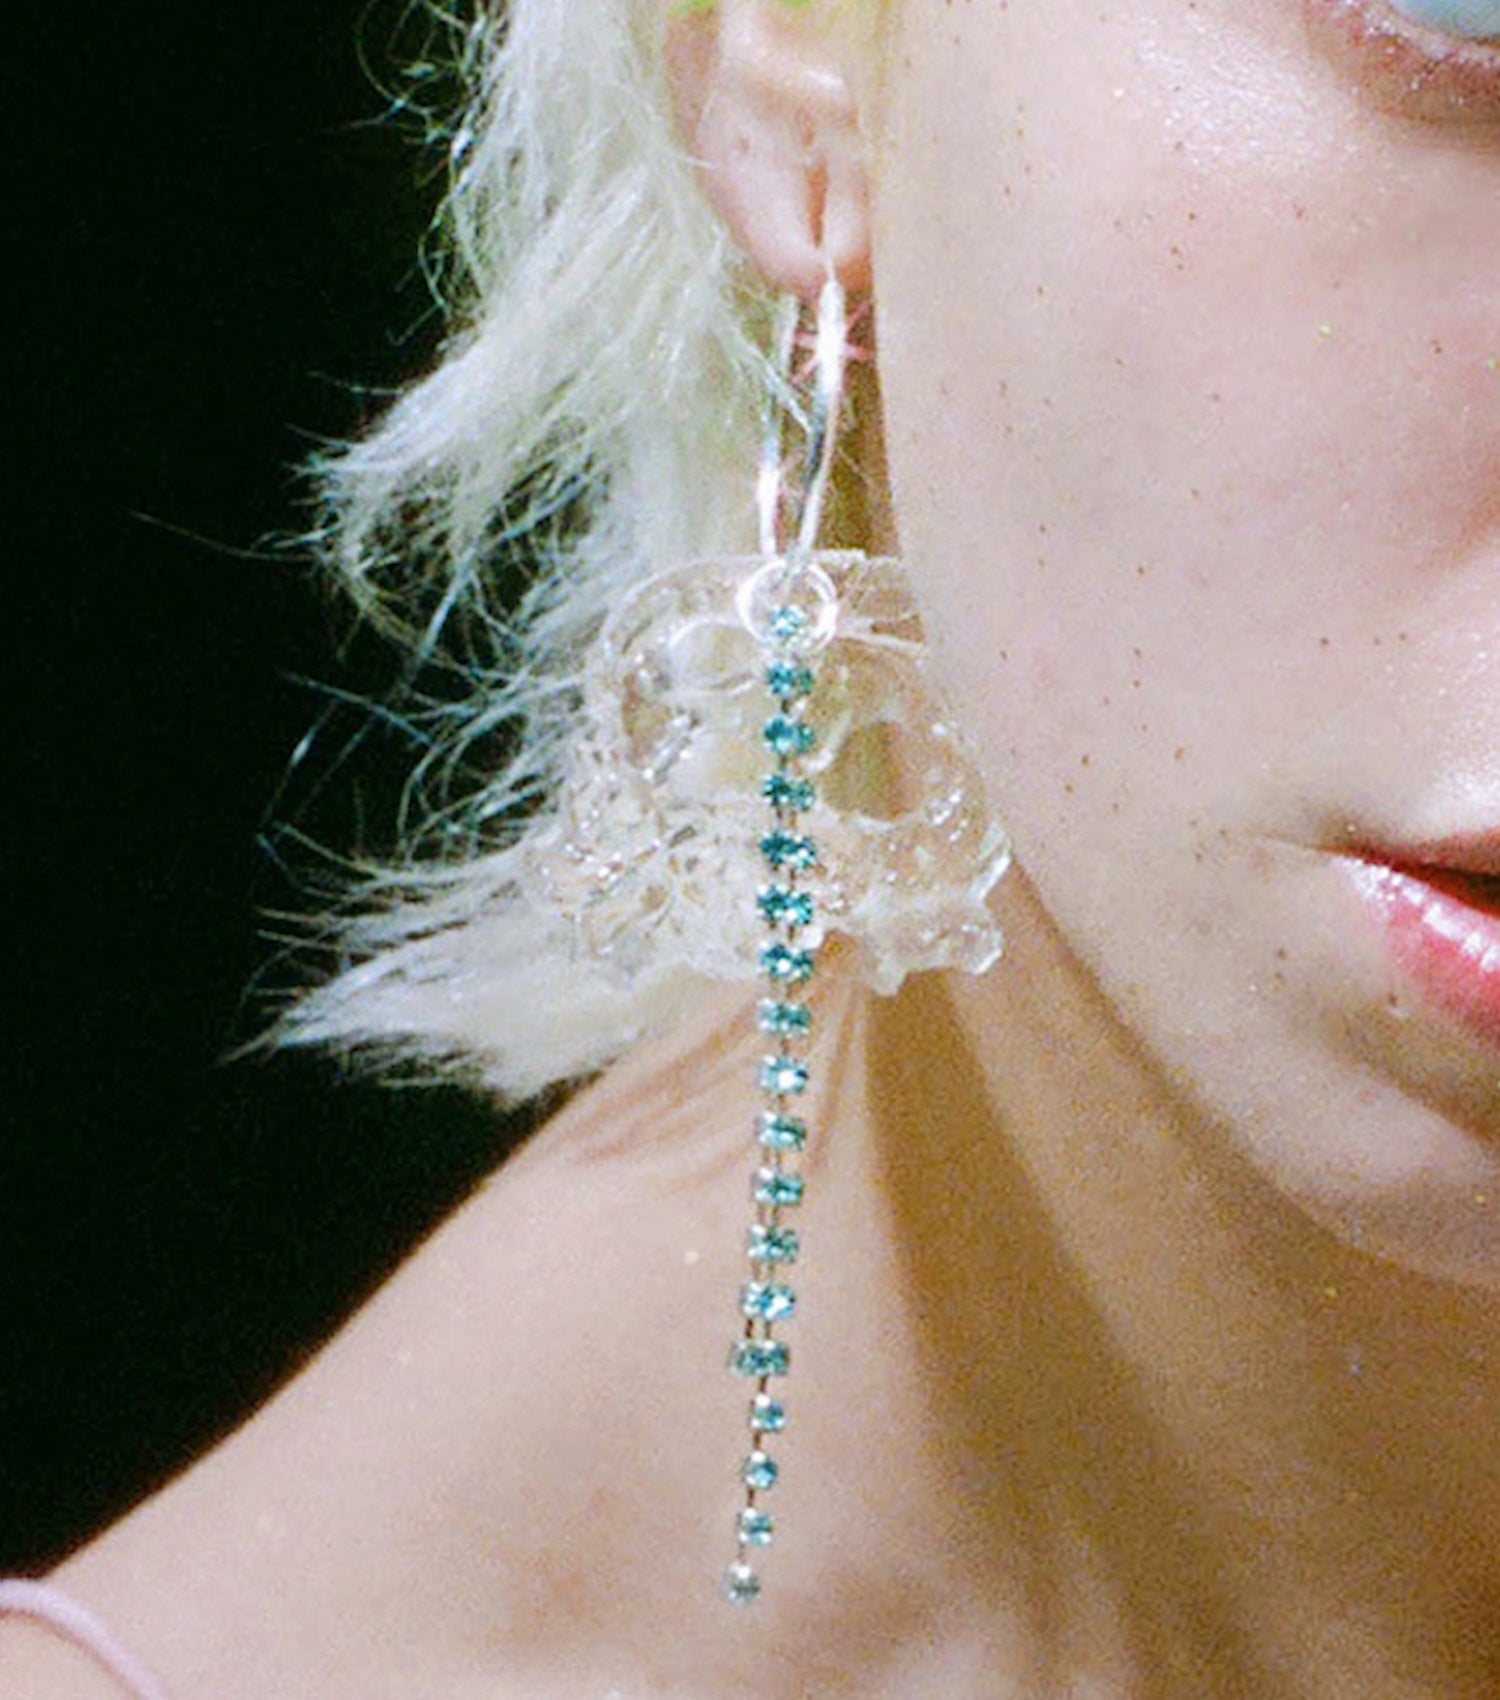 Hoop Earrings, crystal earrings, Fanny Inserra, Upcylced, recycled jewelry, chain earrings, pierced earrings, plexiglass, Kathleen, Kathleen Los Angeles, los angeles boutique, independent artist, independent designer, sustainable fashion, sustainable jewelry, dragon earrings, resin earrings